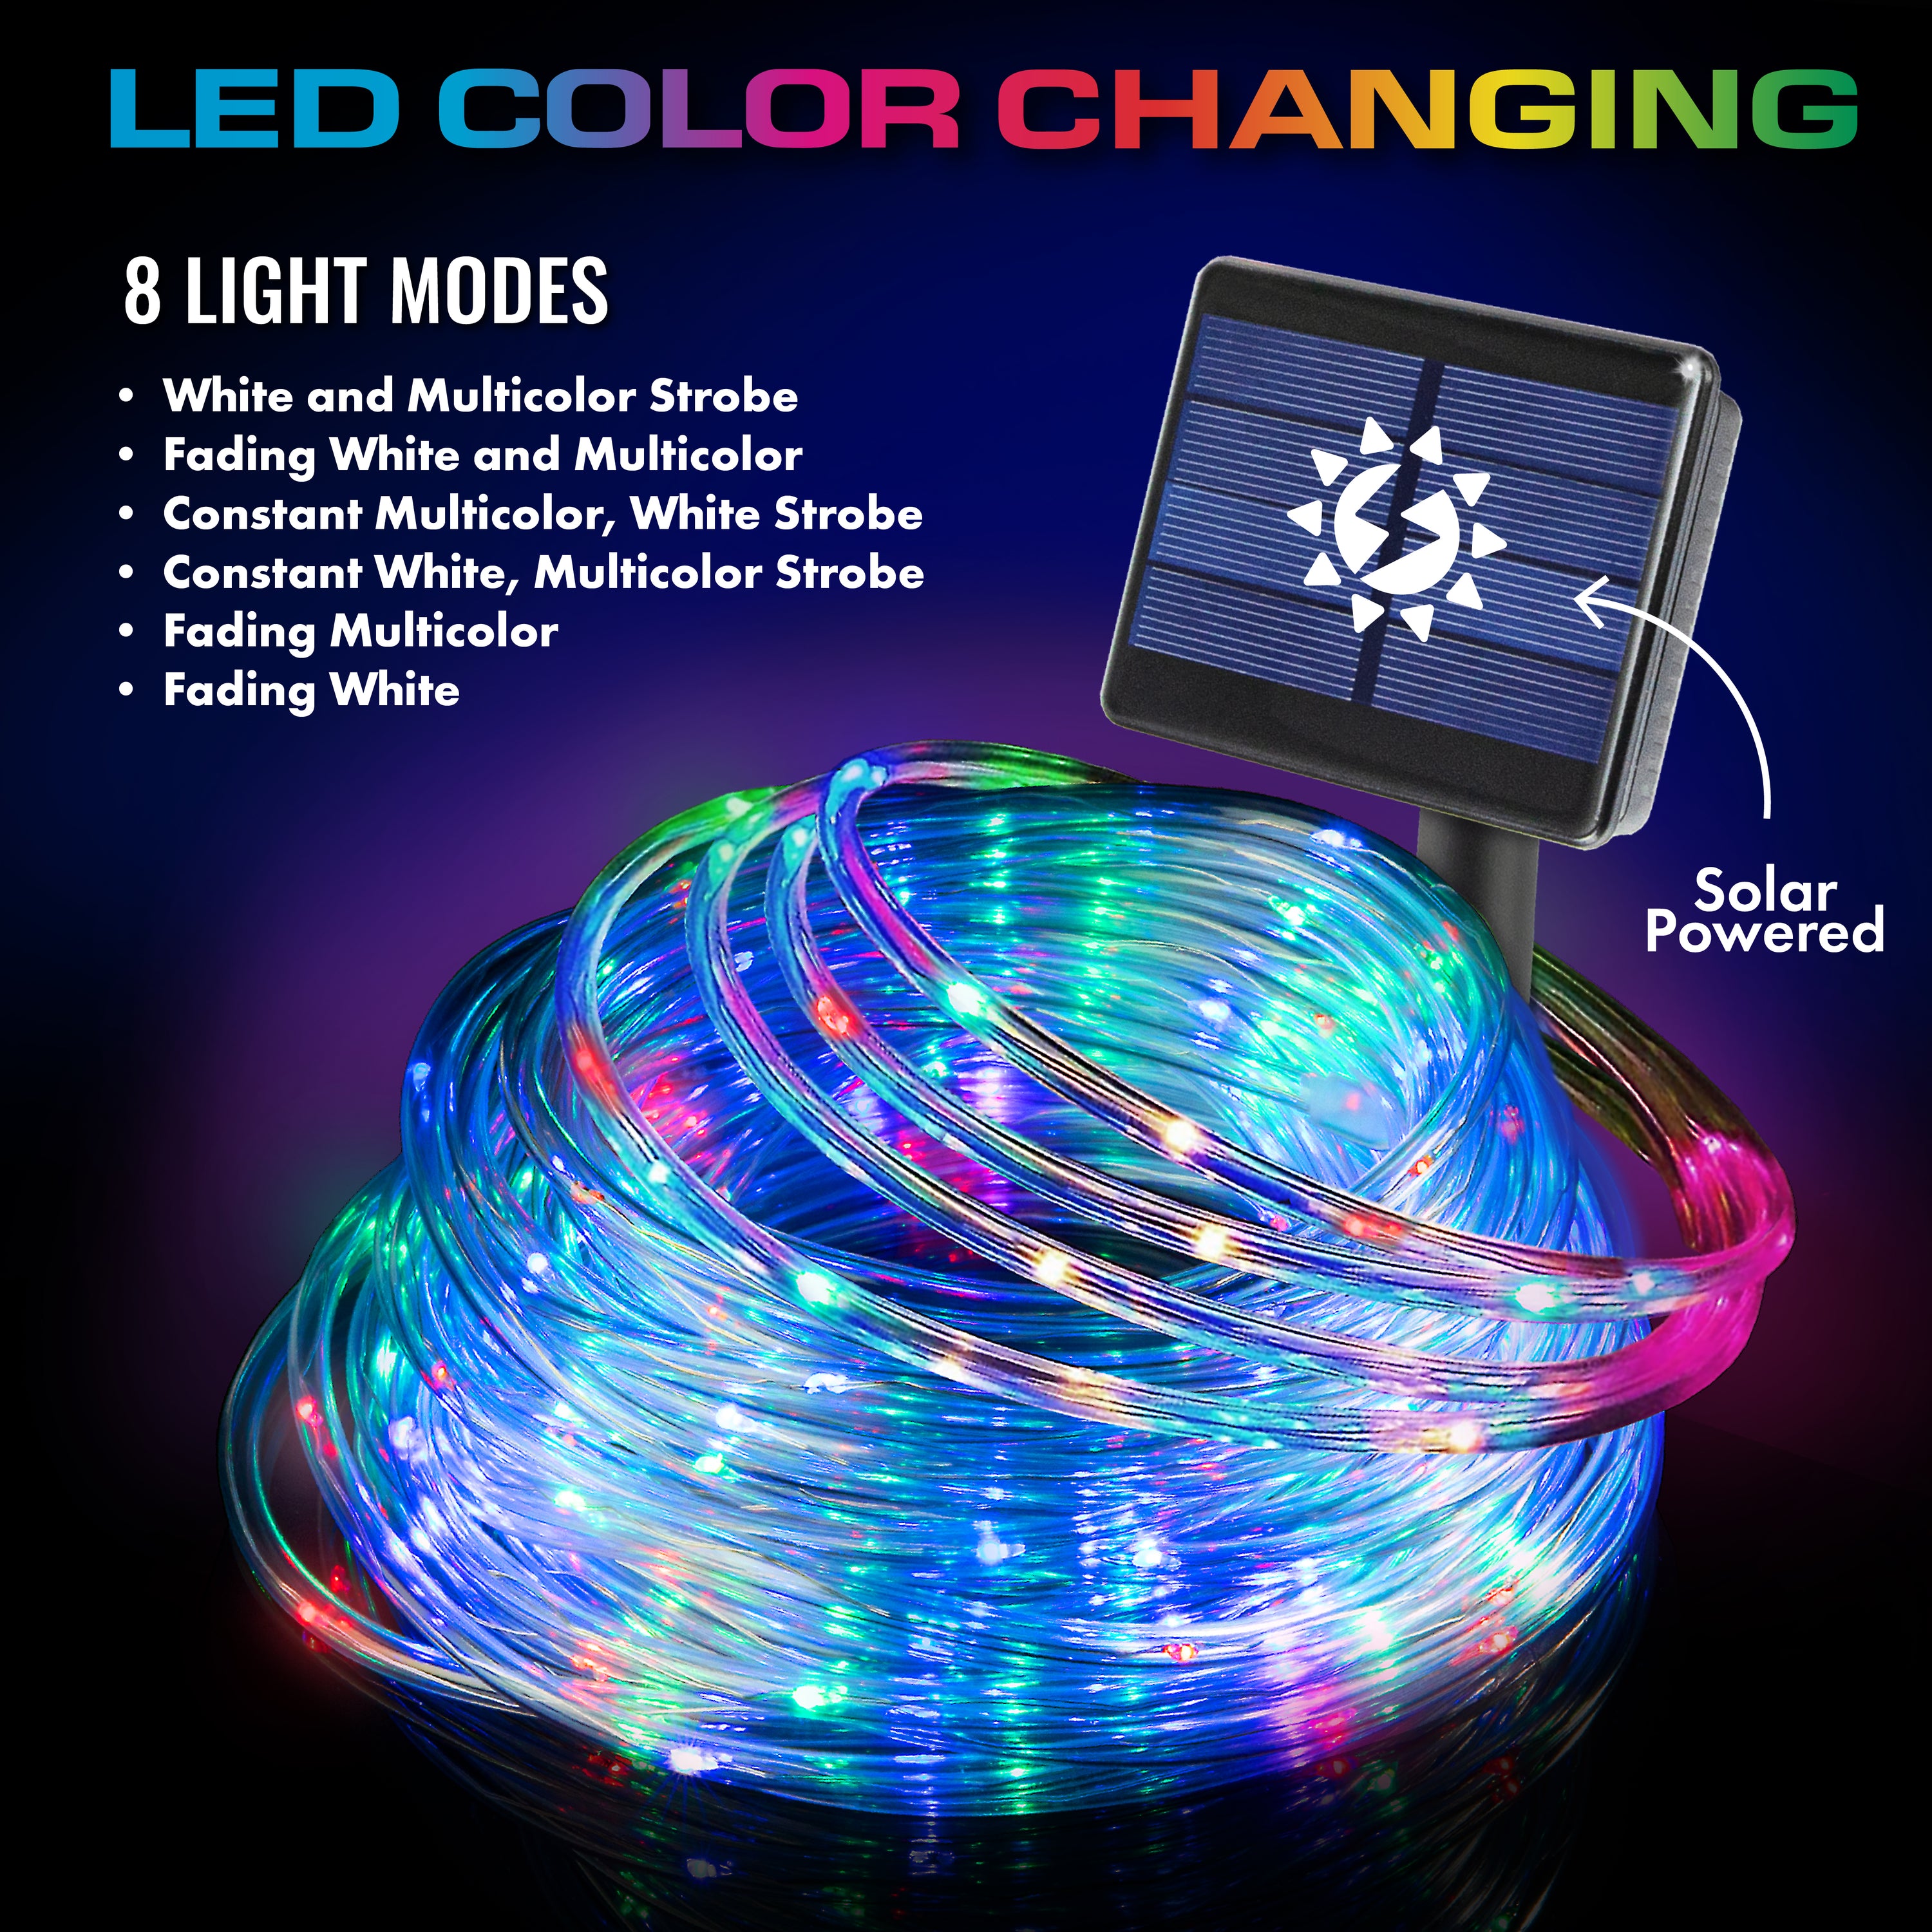 Bell + Howell 50' Bionic Color Changing Solar Powered Rope Lights - 50 FEET